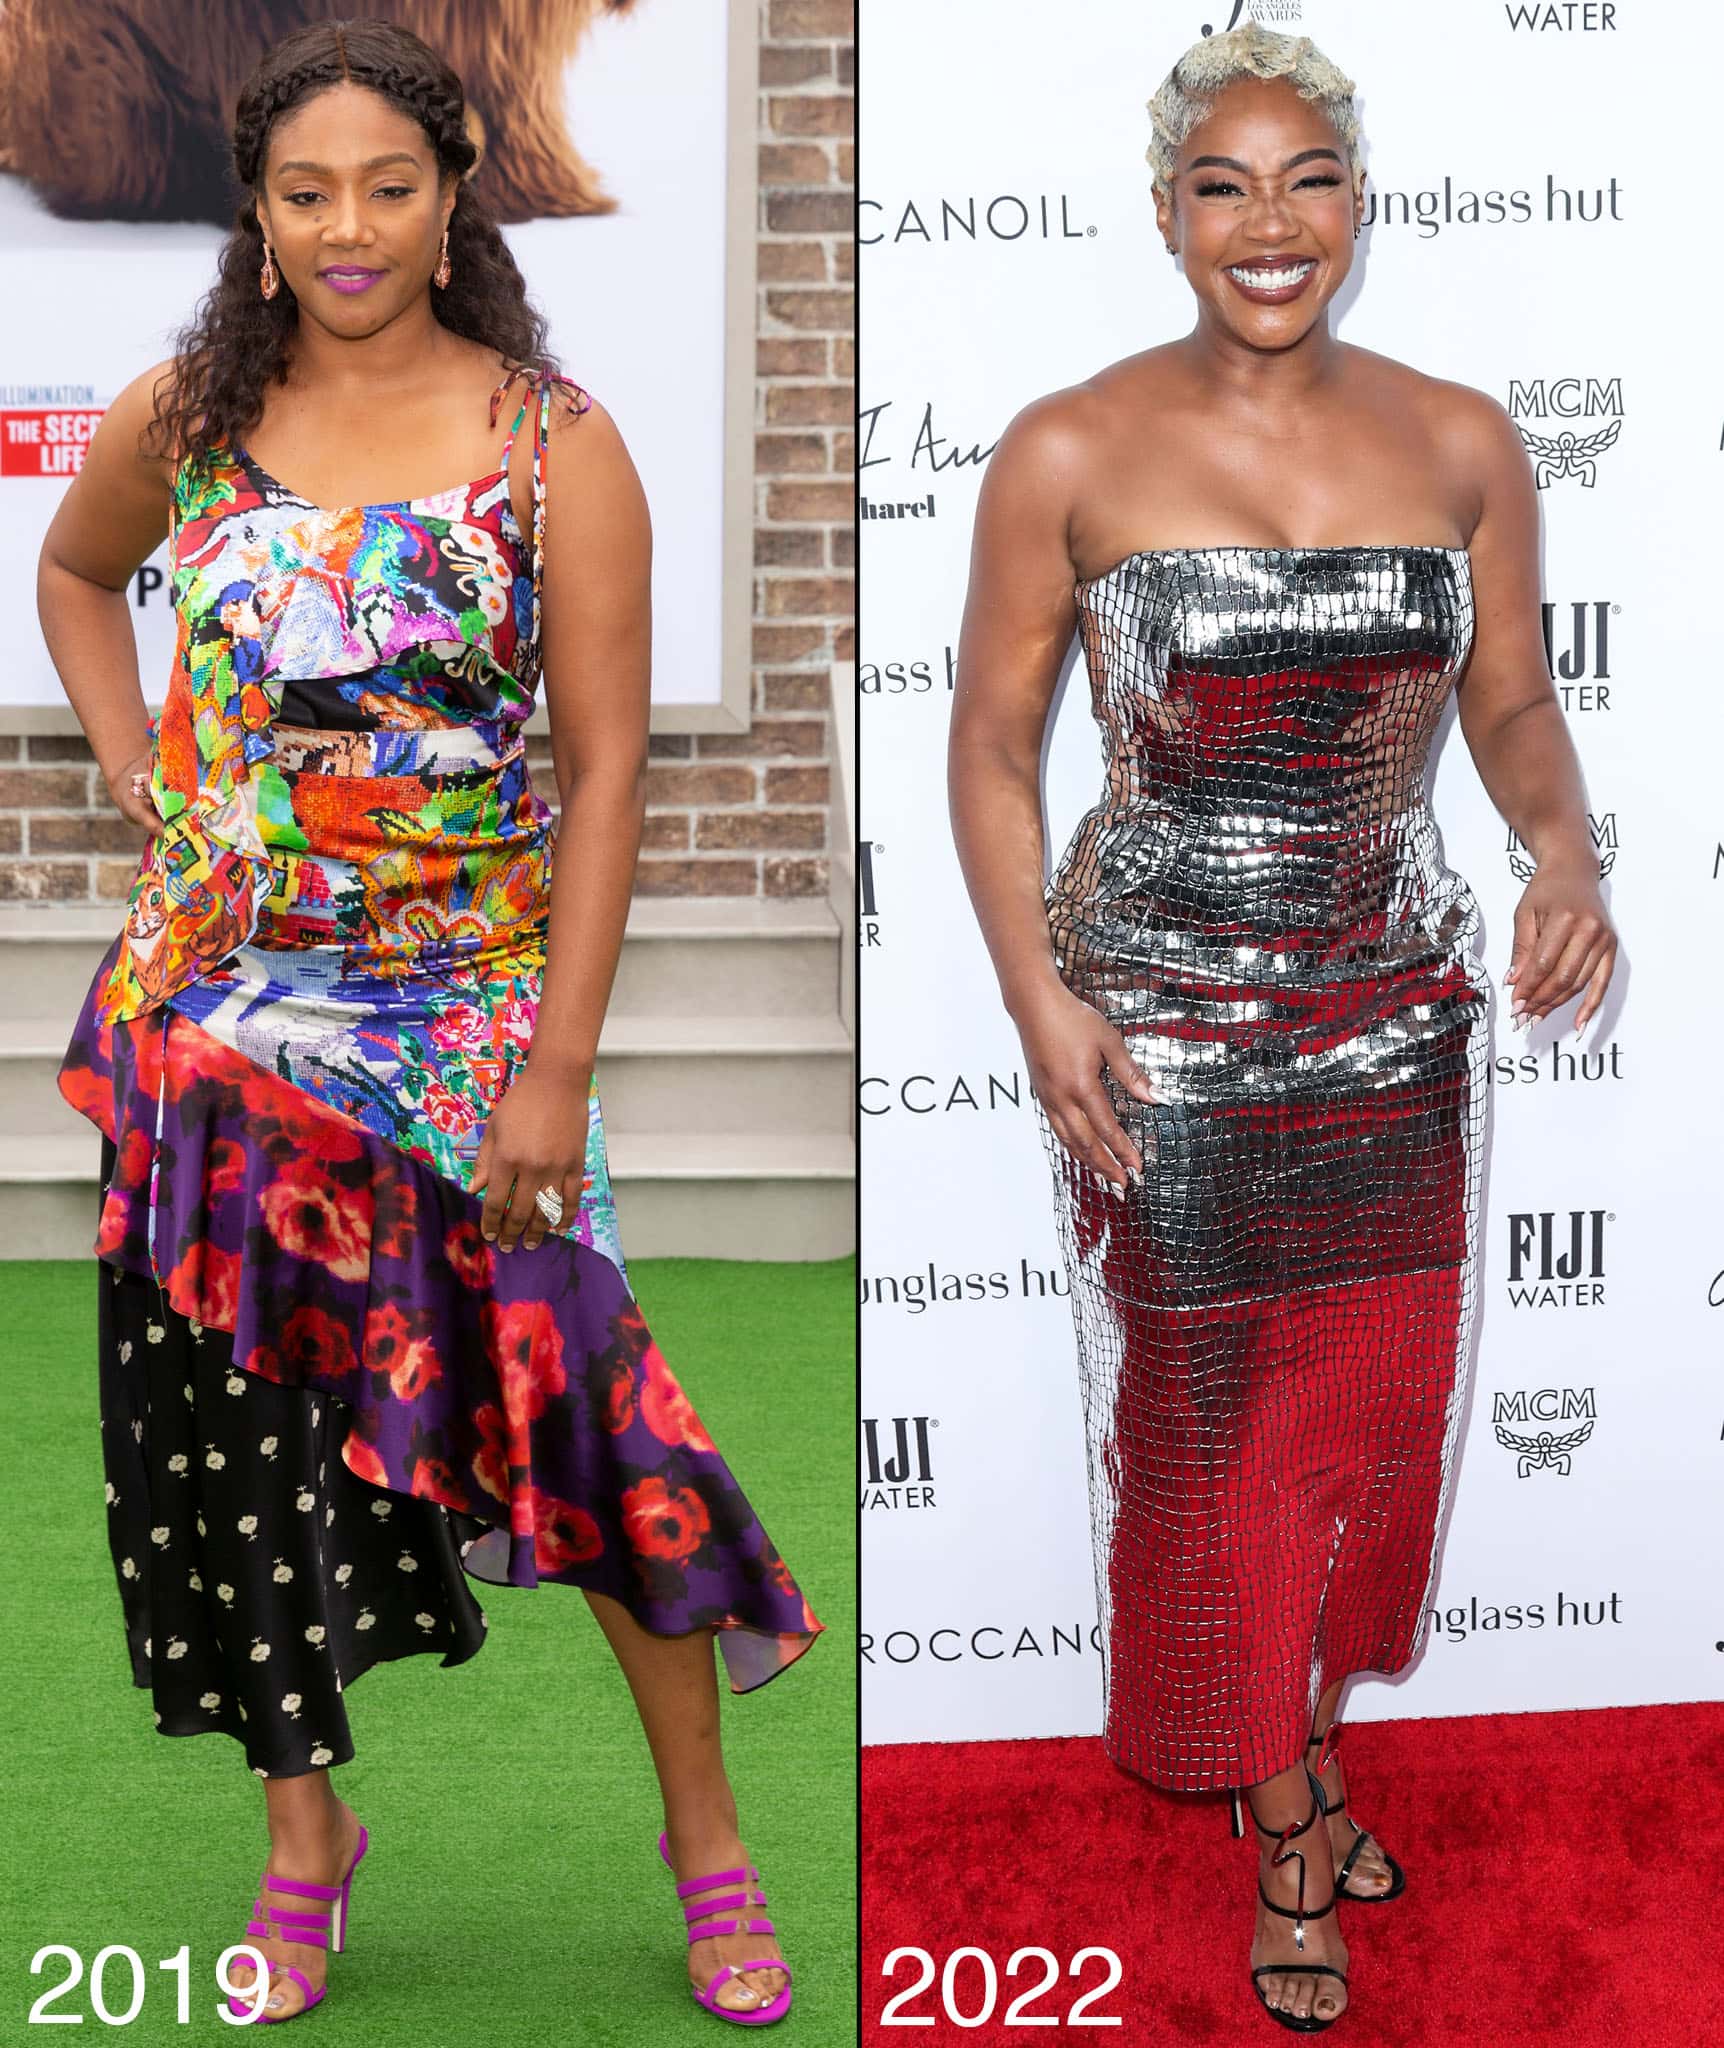 Tiffany Haddish lost 40 pounds during quarantine in 2020 and she has since begun taking her diet and nutrition more seriously